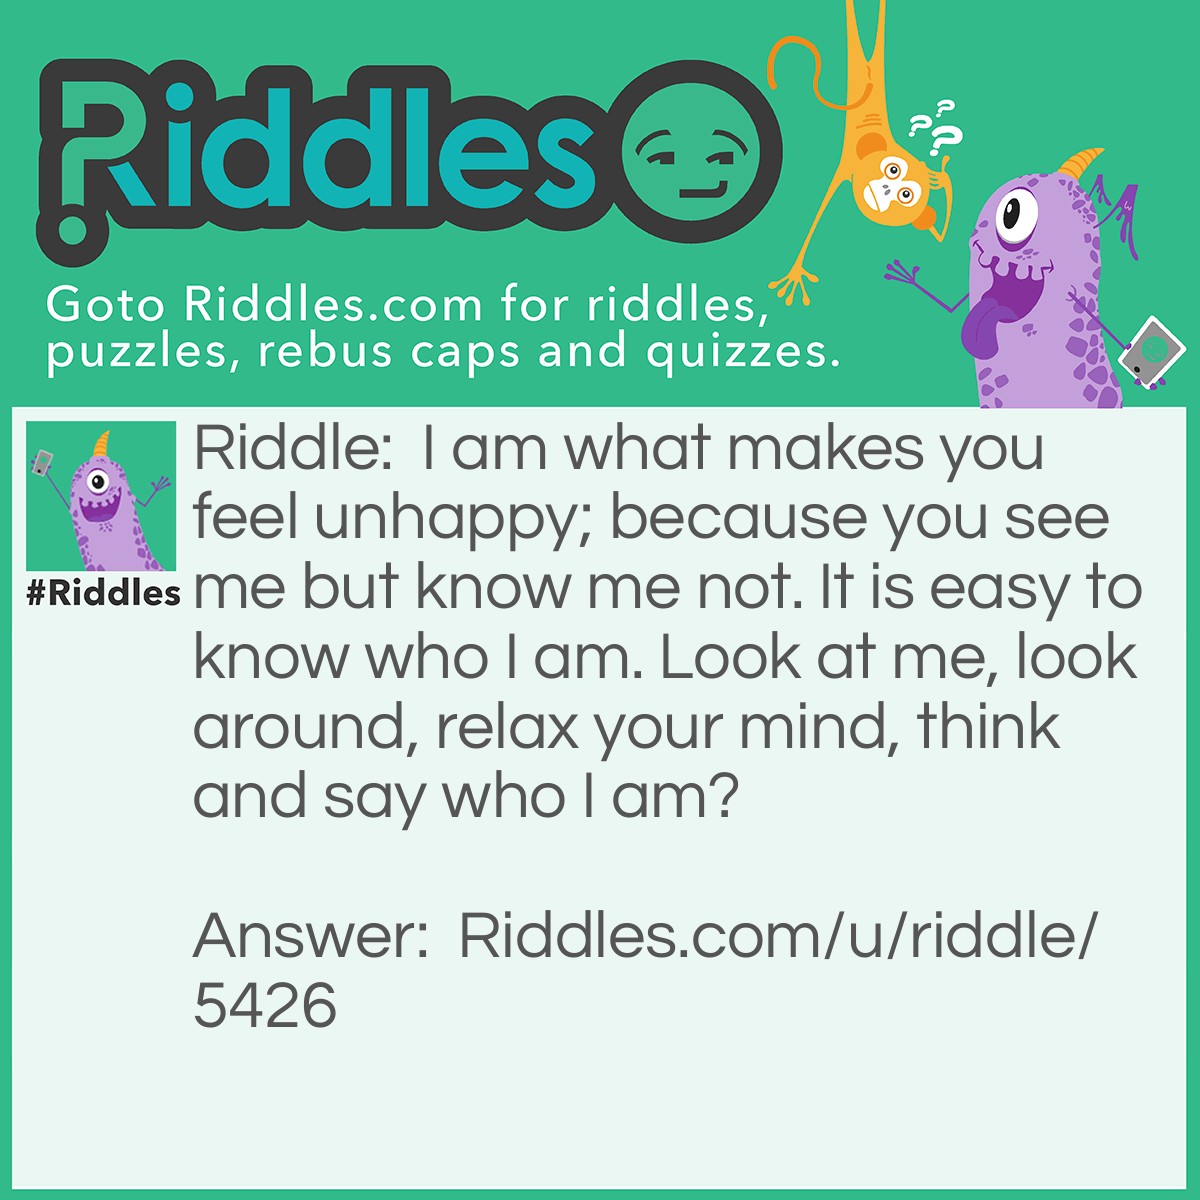 Riddle: I am what makes you feel unhappy; because you see me but know me not. It is easy to know who I am. Look at me, look around, relax your mind, think and say who I am? Answer: A Riddle.